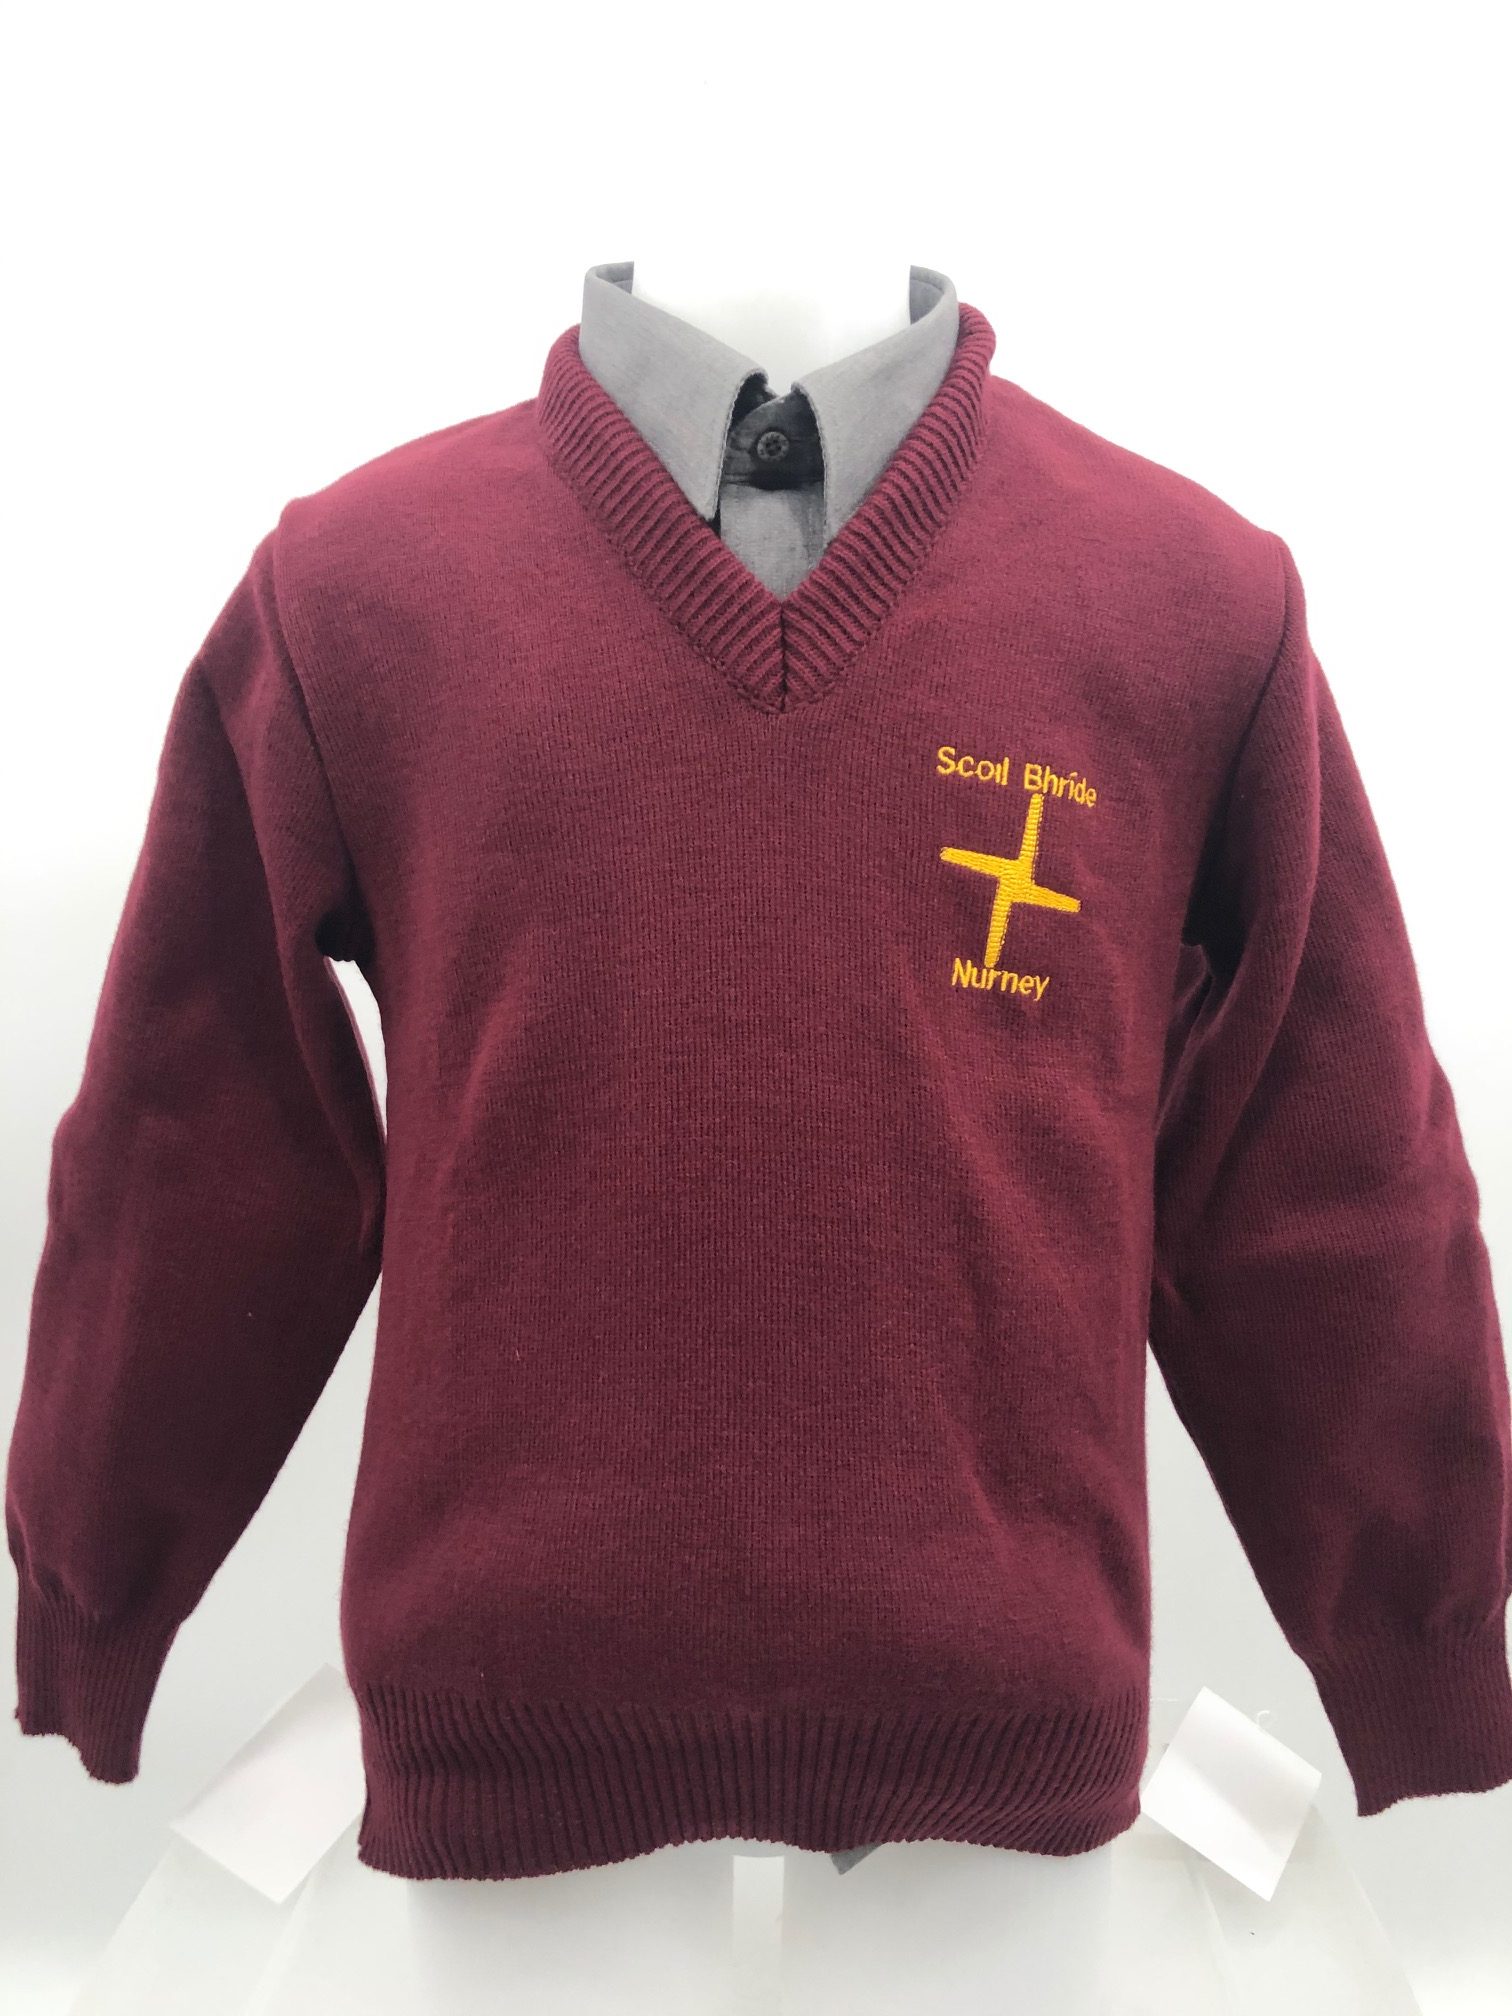 Scoil Bhride Nurney Jumper - The Back to School Store